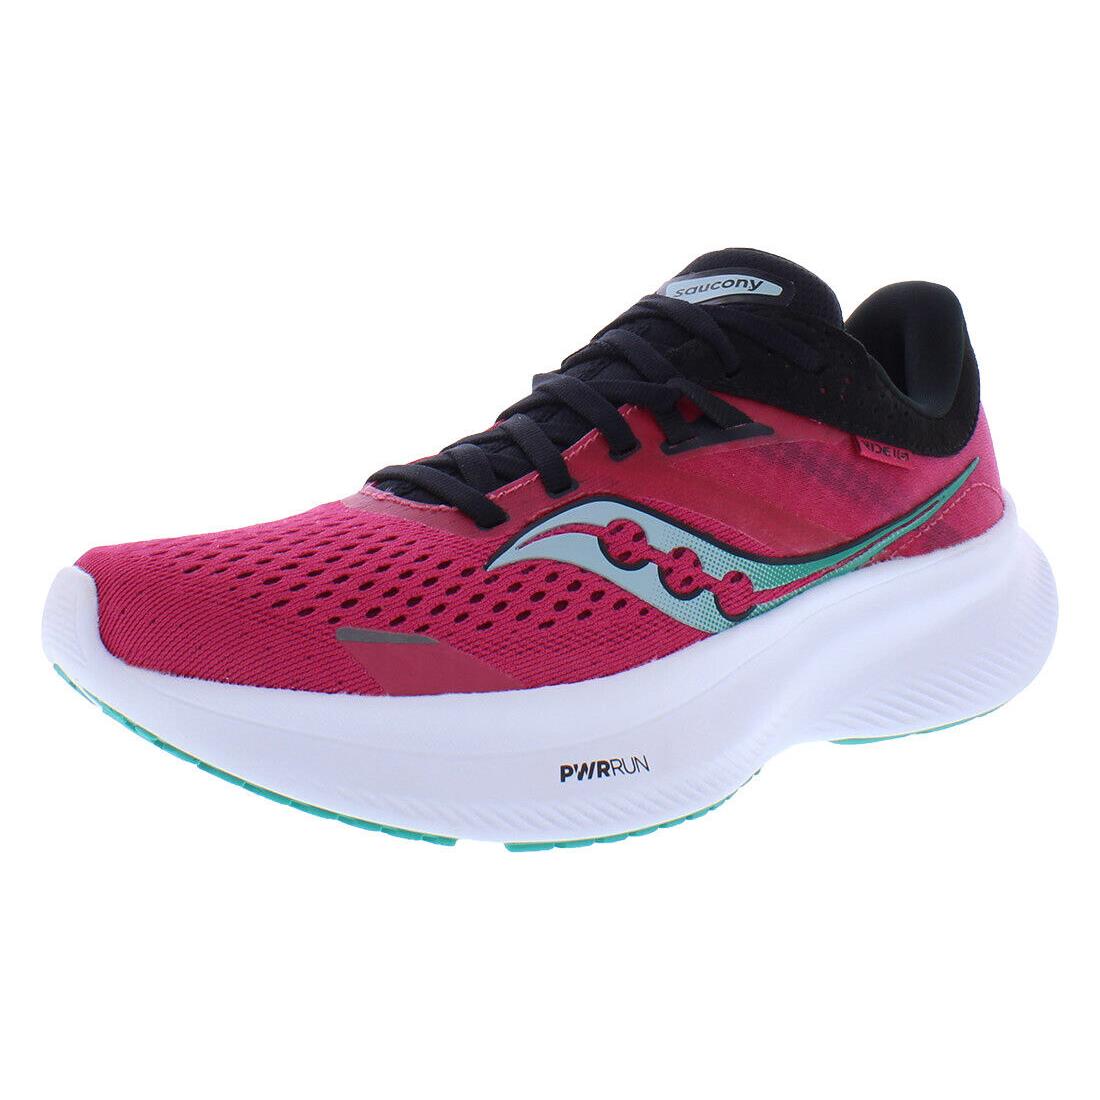 Saucony Ride 16 Womens Shoes - Rose/Black, Main: Pink